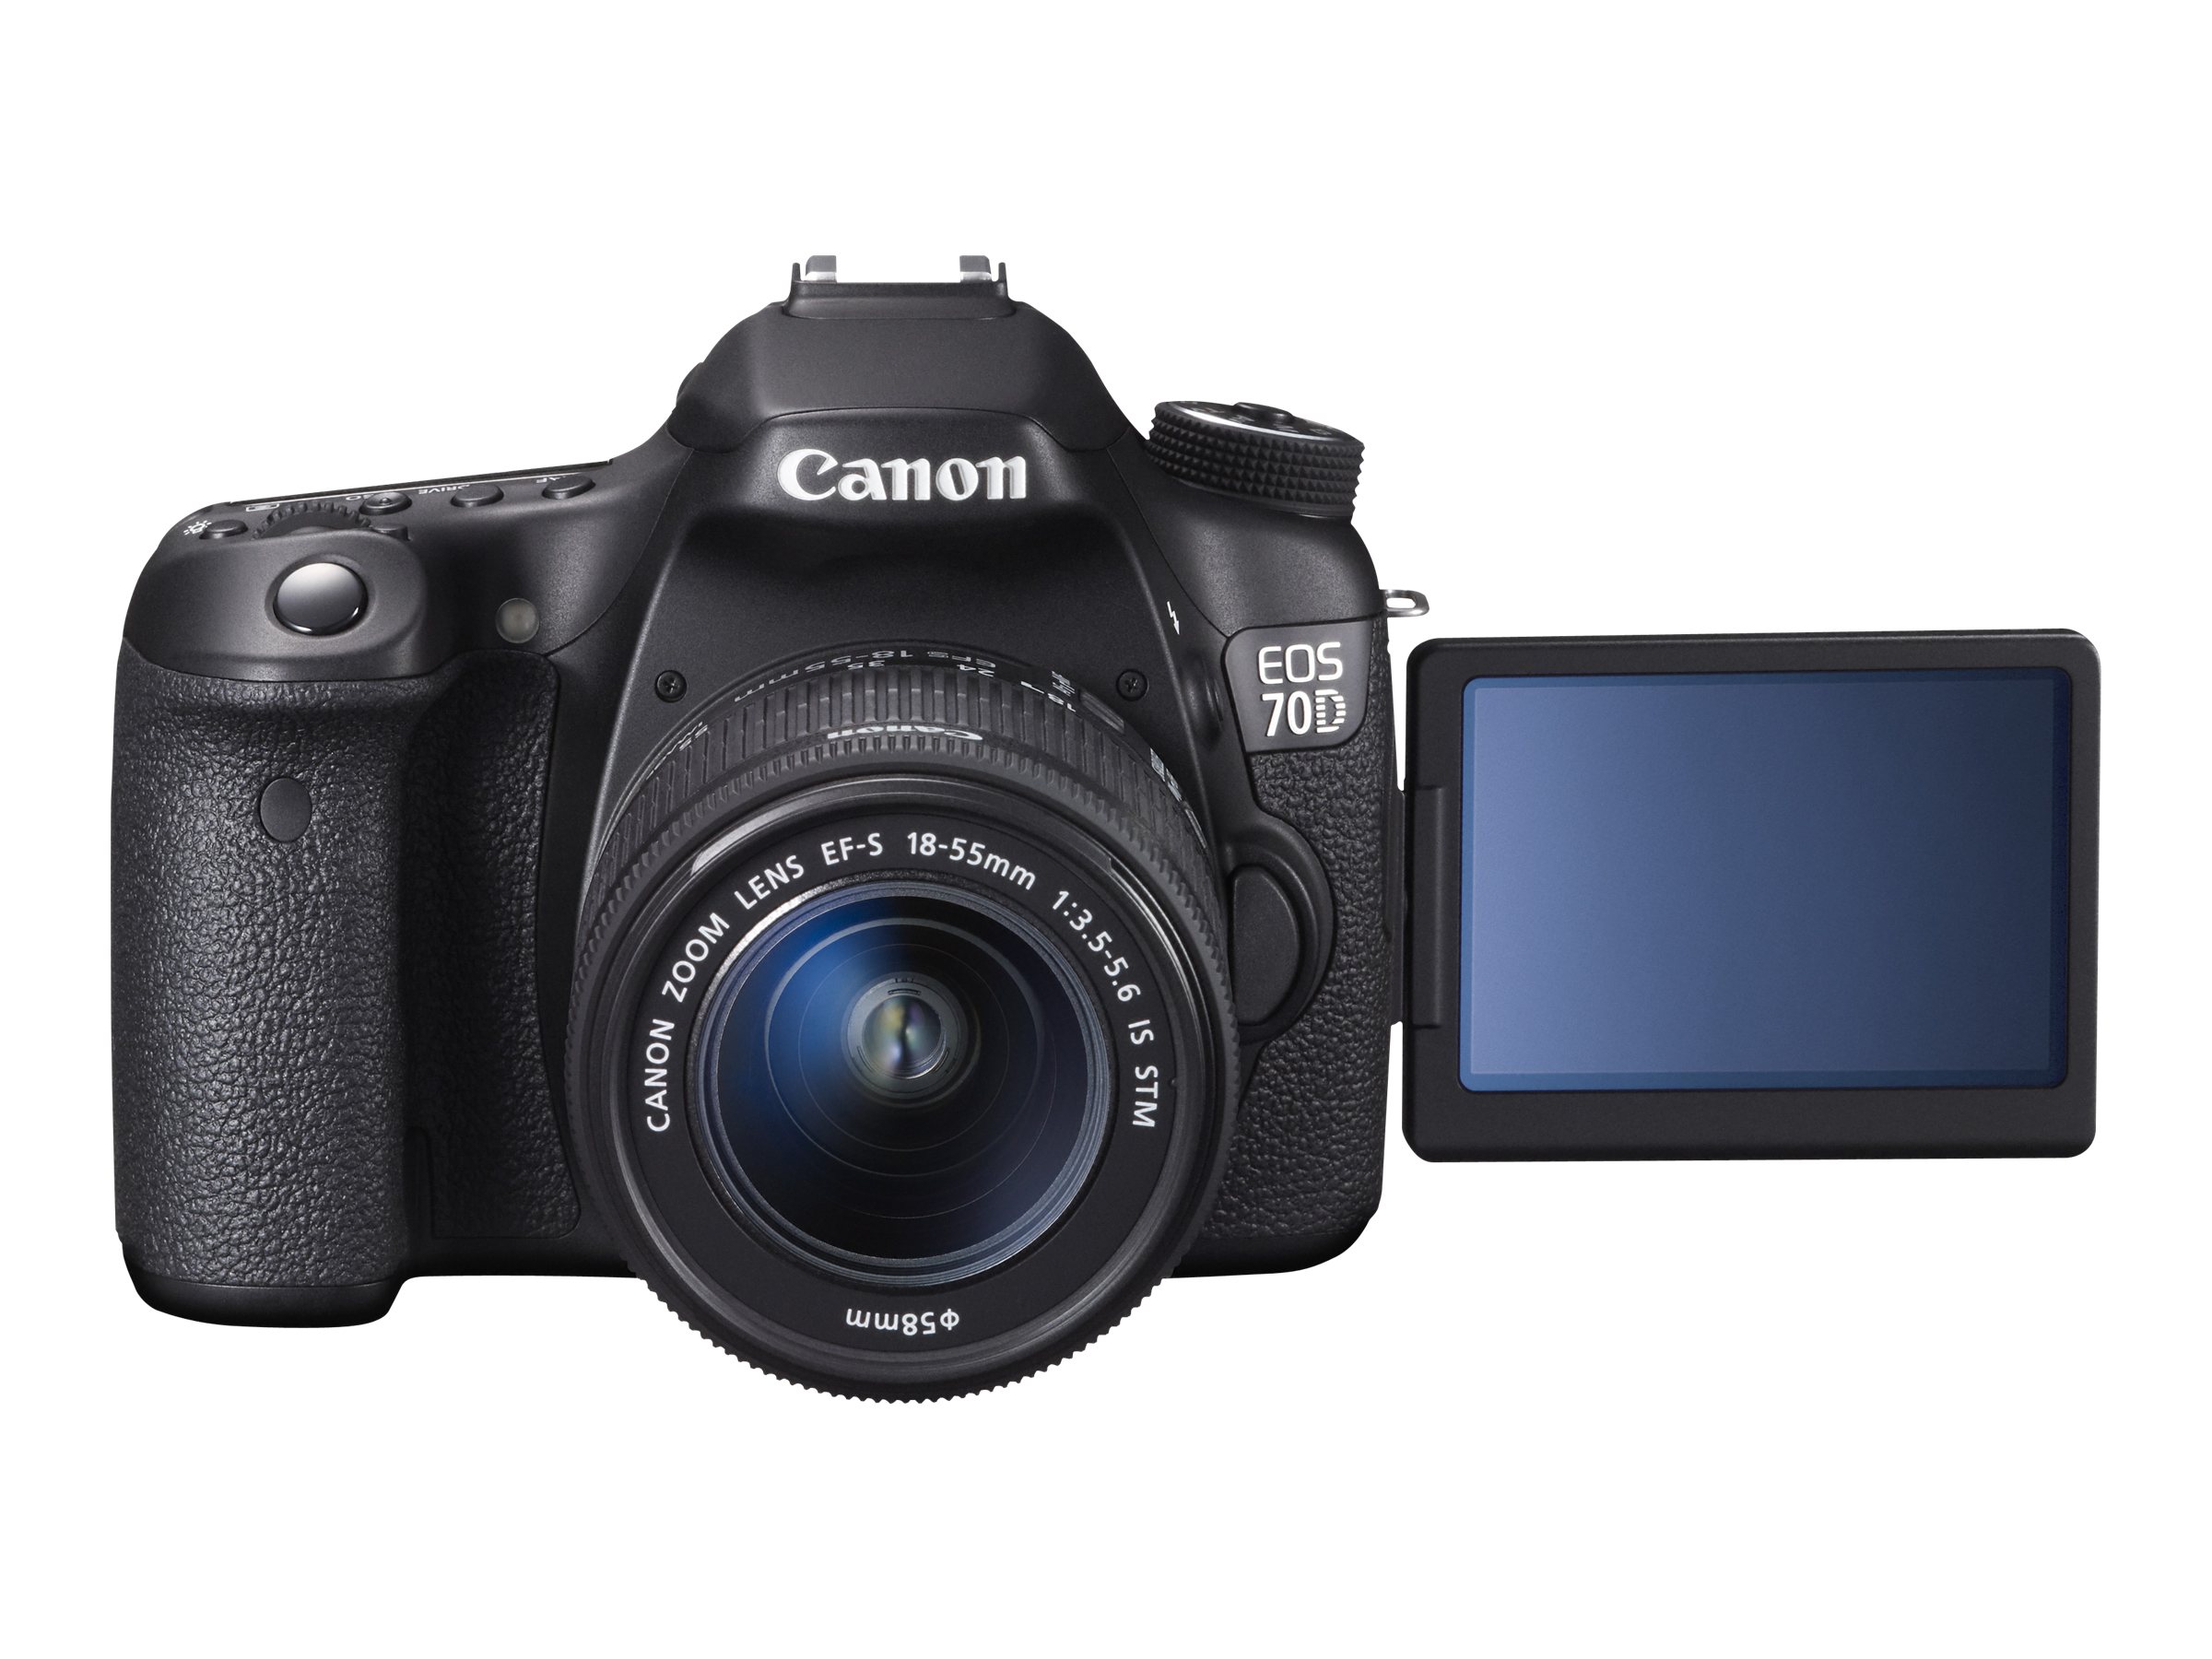 Canon EOS 70D - Digital camera - SLR - 20.2 MP - APS-C - 1080p - 7.5x optical zoom EF-S 18-135mm IS STM lens - Wi-Fi - image 5 of 15